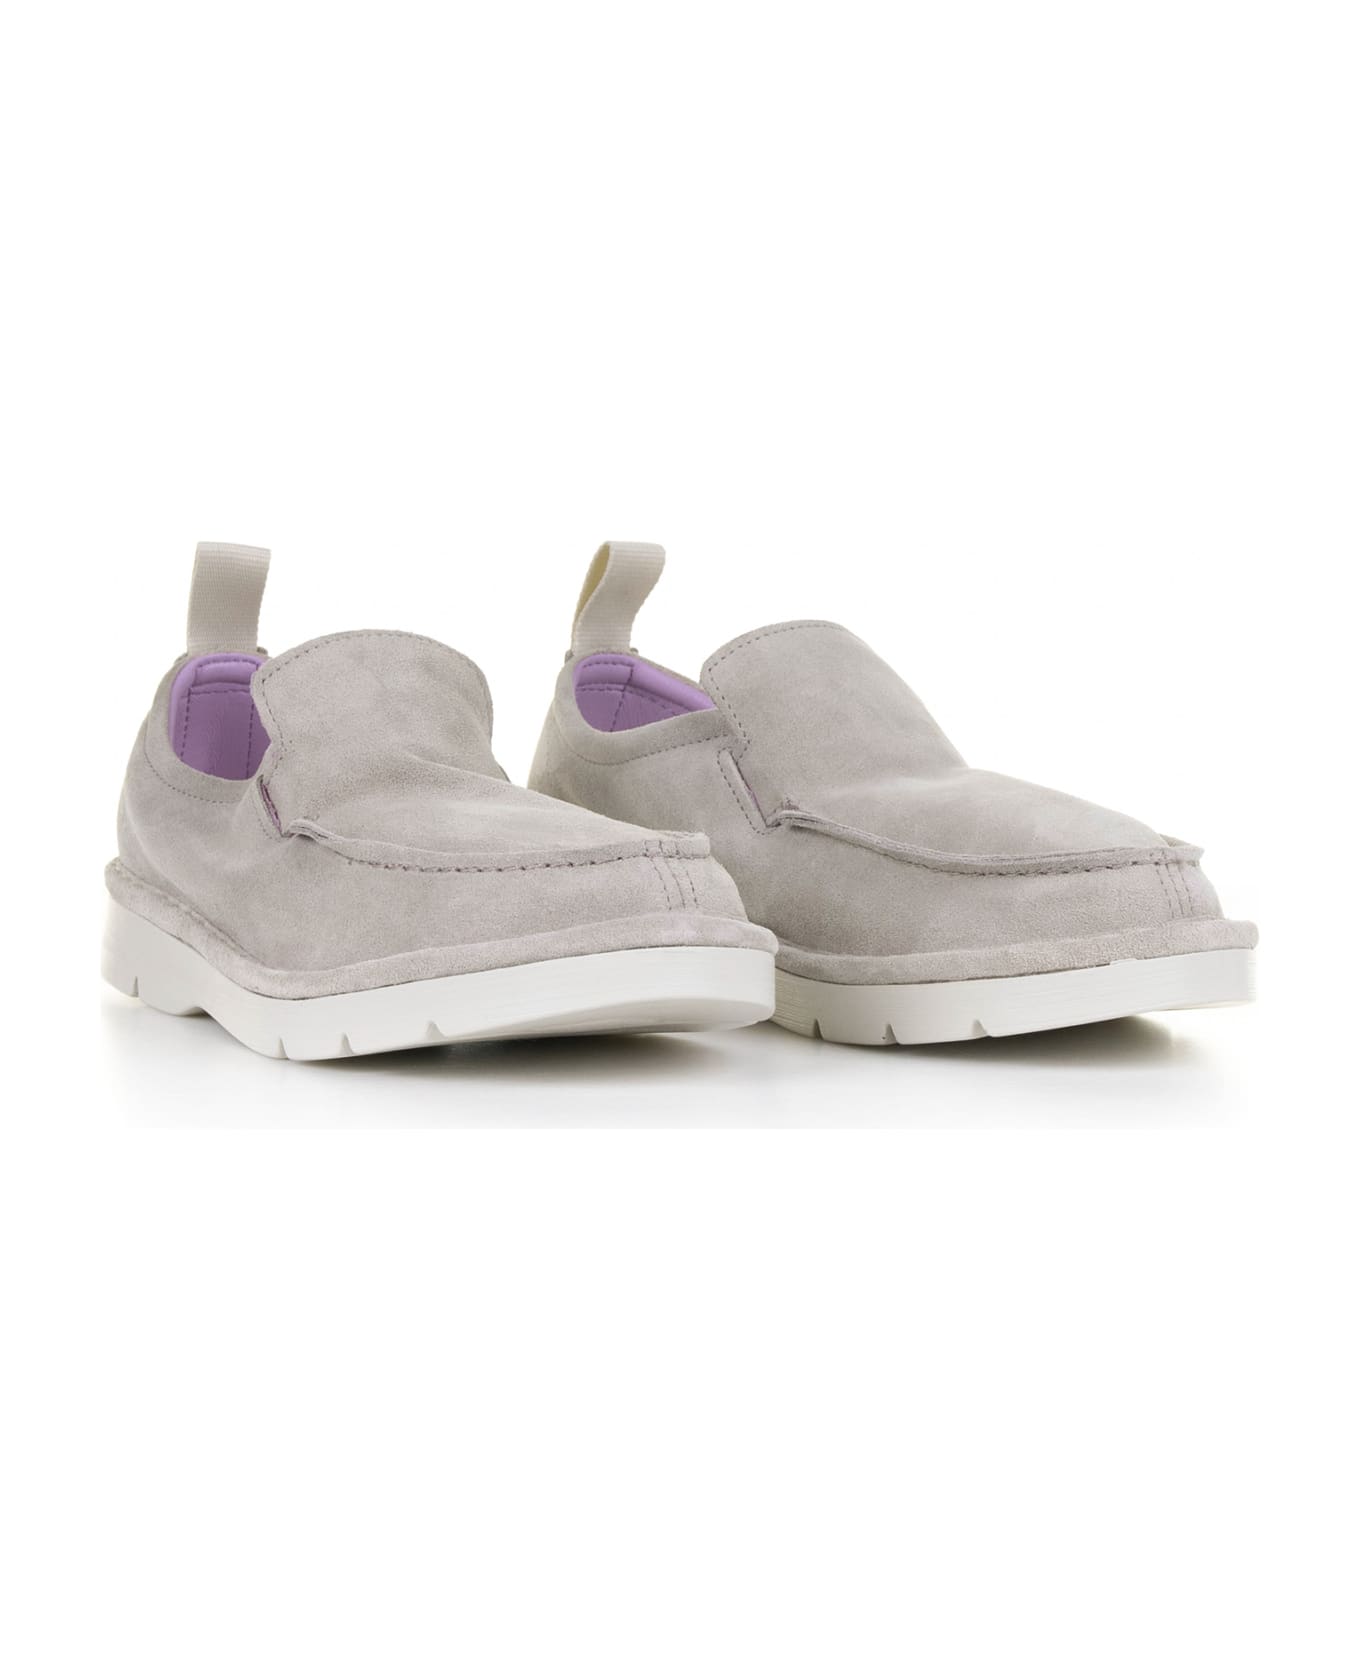 Panchic Gray Suede Moccasin - FOG